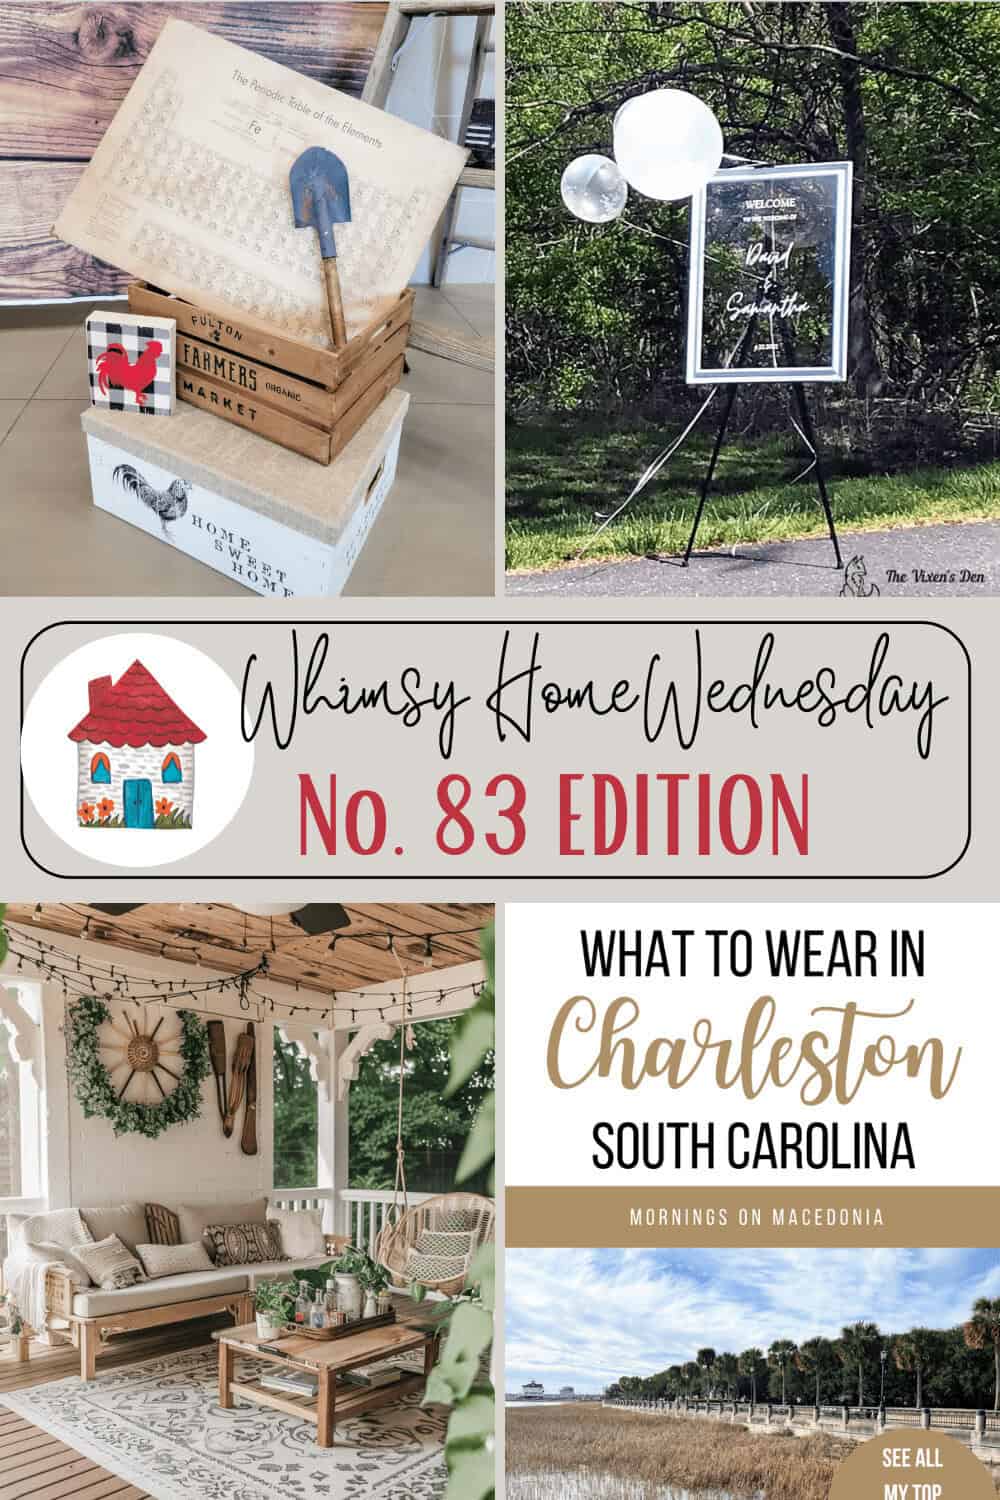 Collage image featuring DIY garden decor, an outdoor event display, a porch setup with hanging plants and a woven chair, and a beach scene promoting what to wear in Charleston, South Carolina.